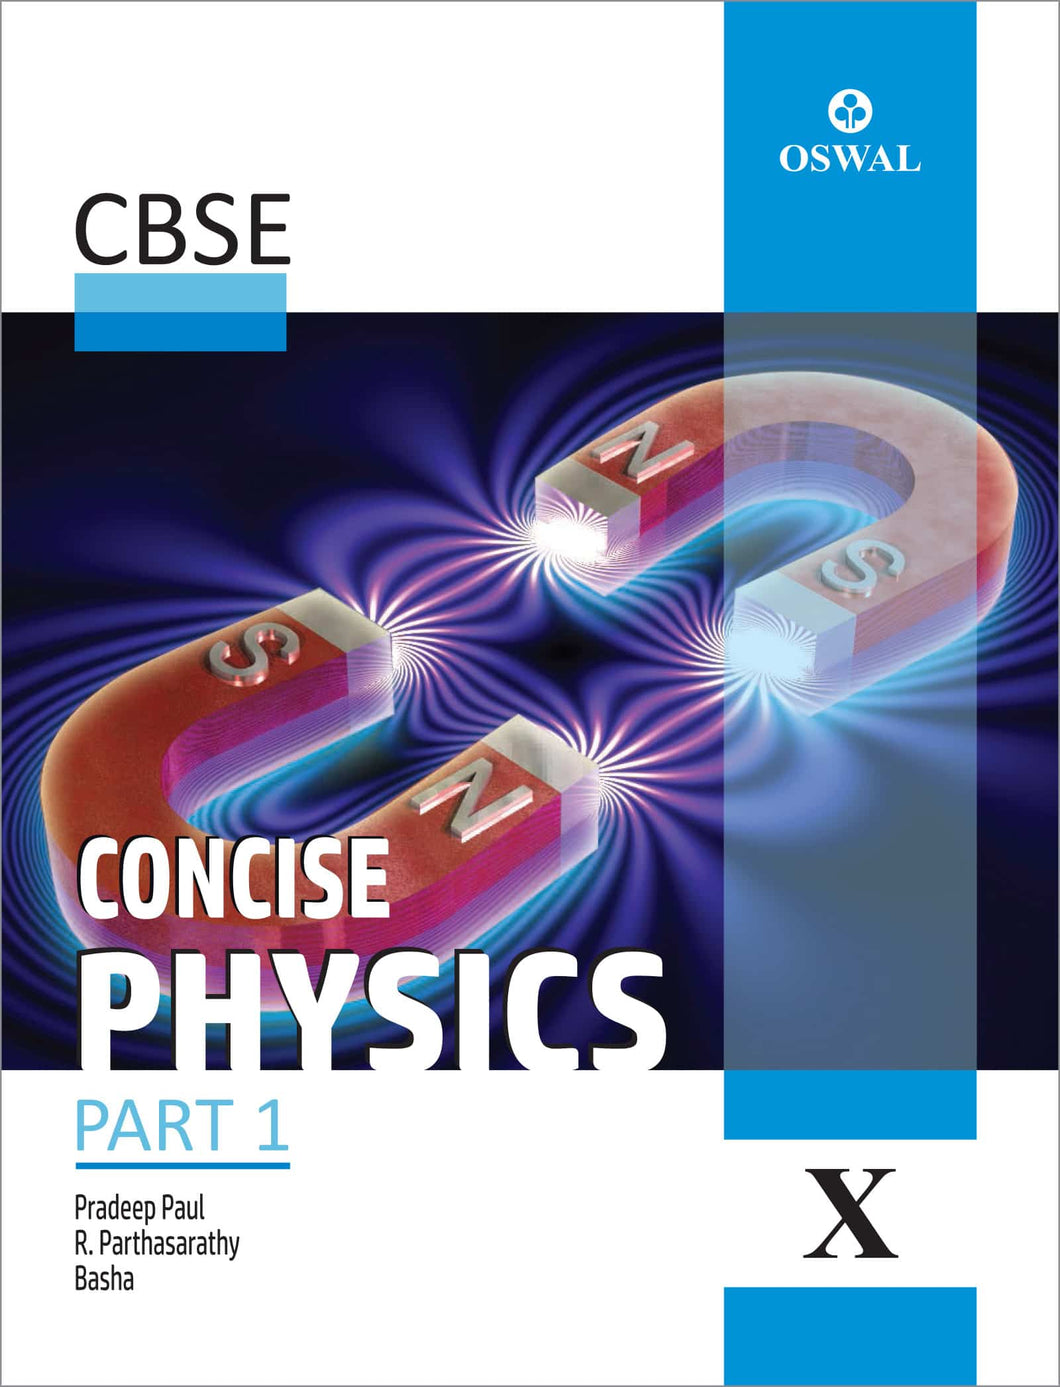 Oswal Concise Physics: Textbook for CBSE Class 10